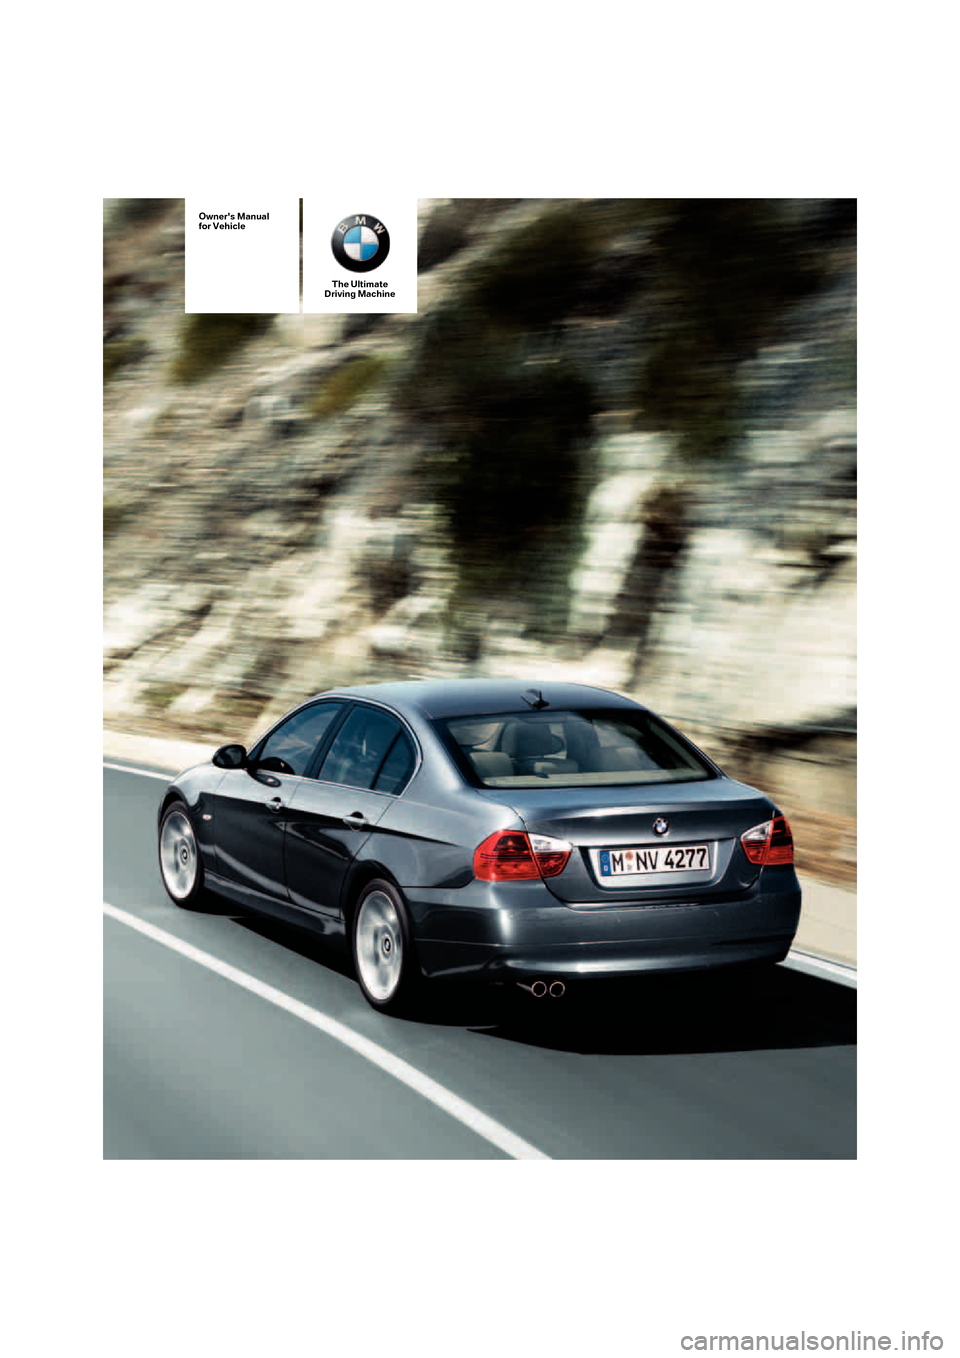 BMW 325XI SEDAN 2006 E90 Owners Manual The Ultimate
Driving Machine
Owners Manual
for Vehicle 